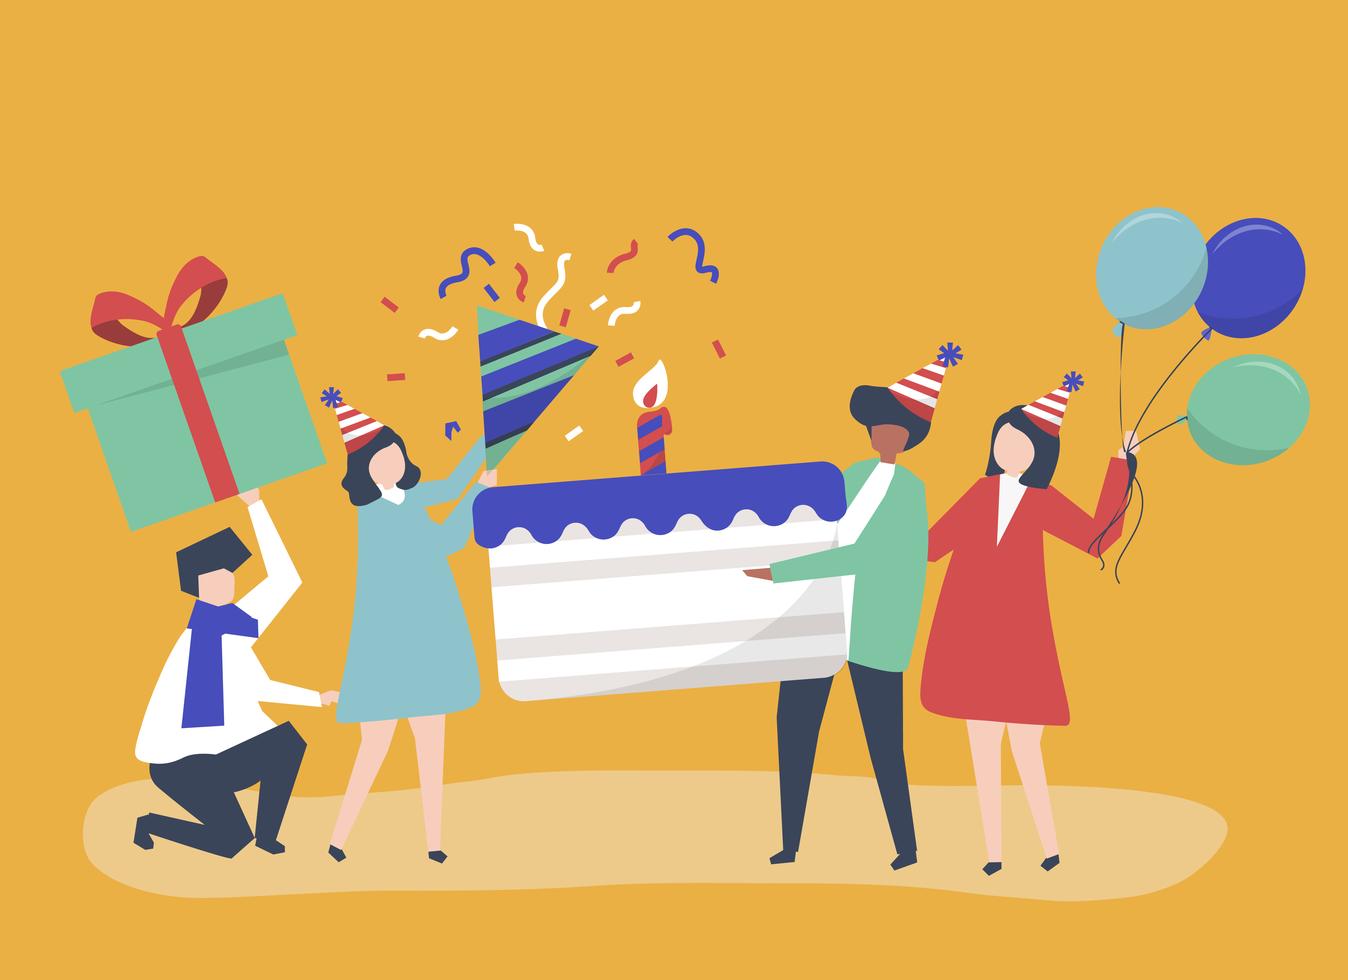 Character illustration of people holding birthday party icons ...